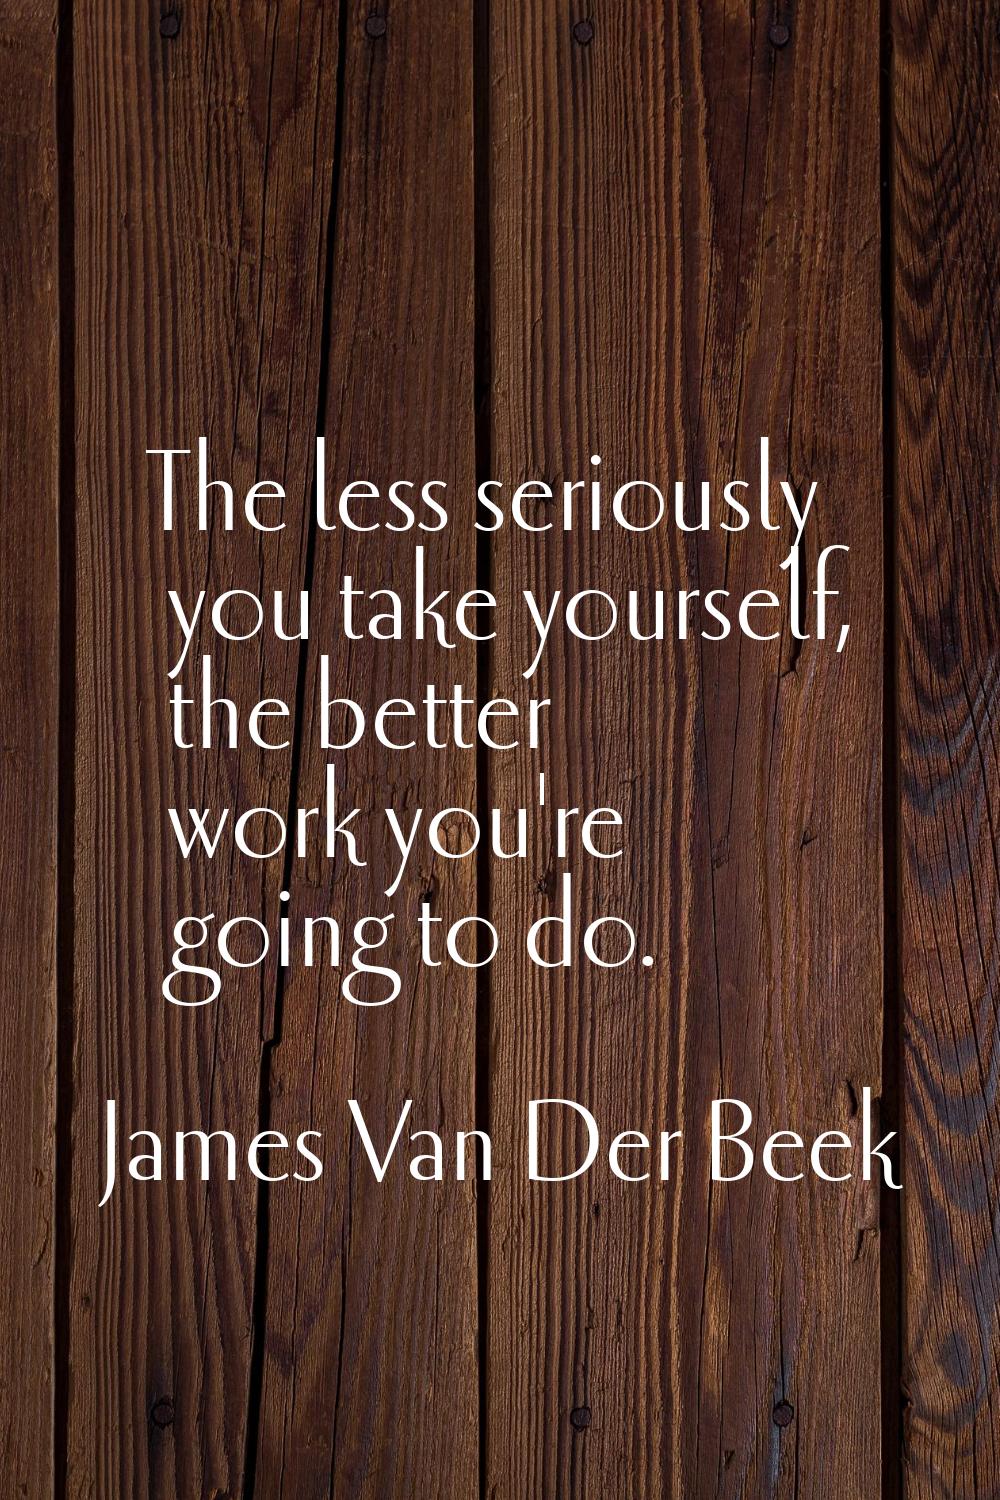 The less seriously you take yourself, the better work you're going to do.